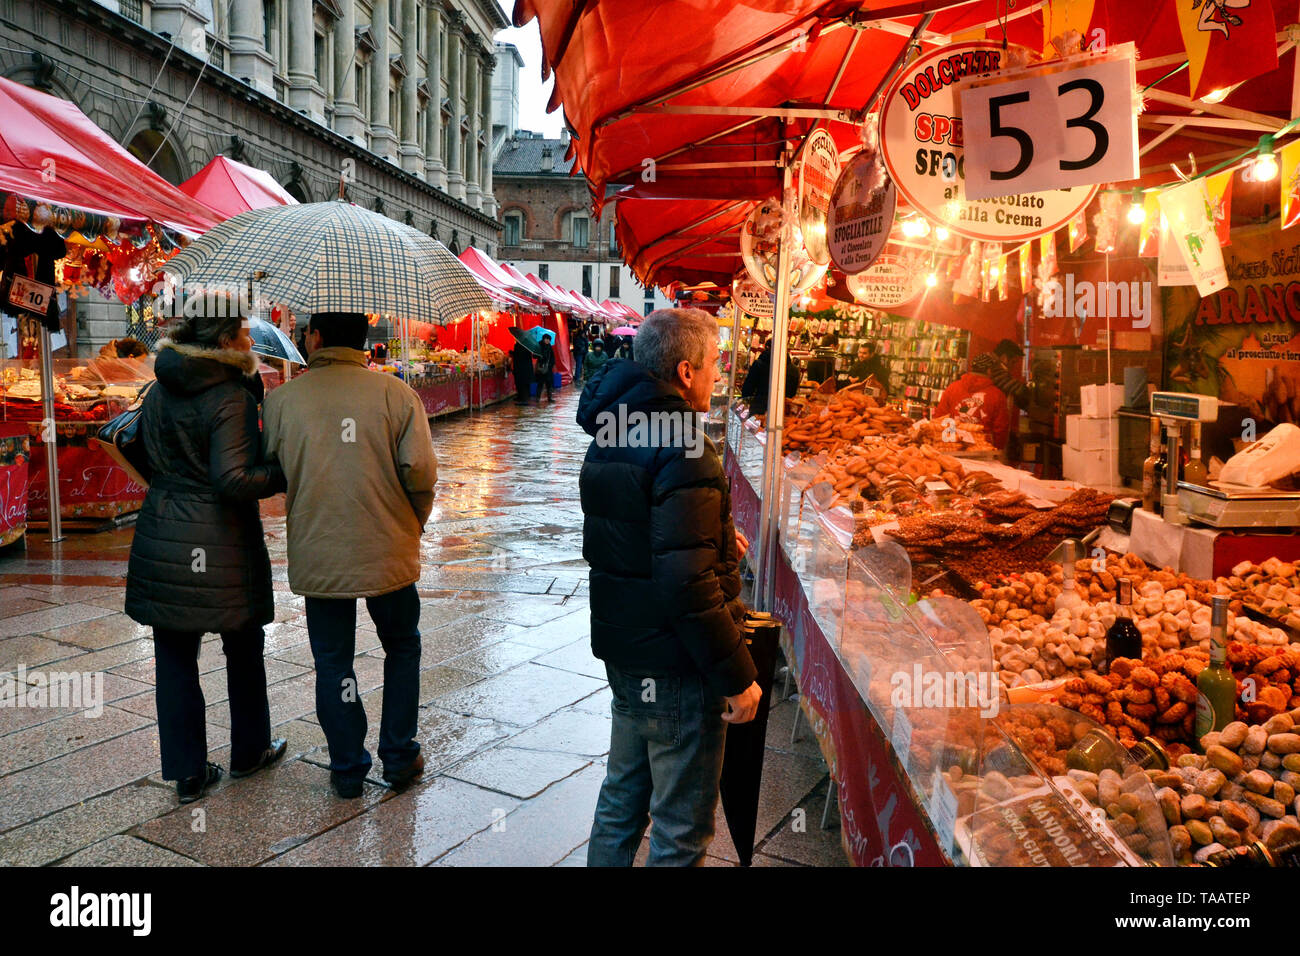 Typical Christmas market in Milan, Italy Stock Photo